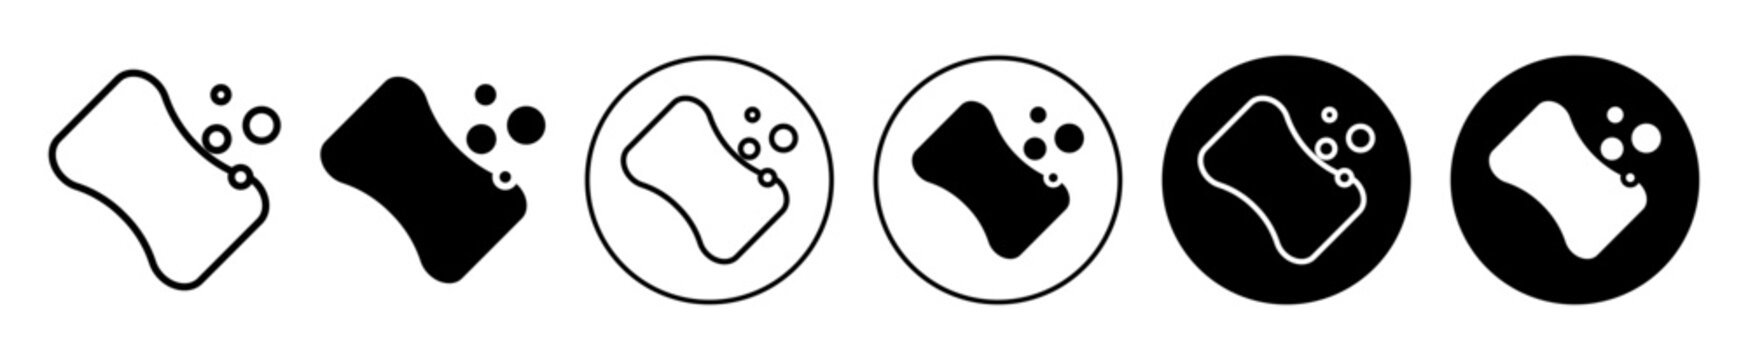 Soap icon set. Soap bar with bubbles vector symbol in black filled and outlined style.